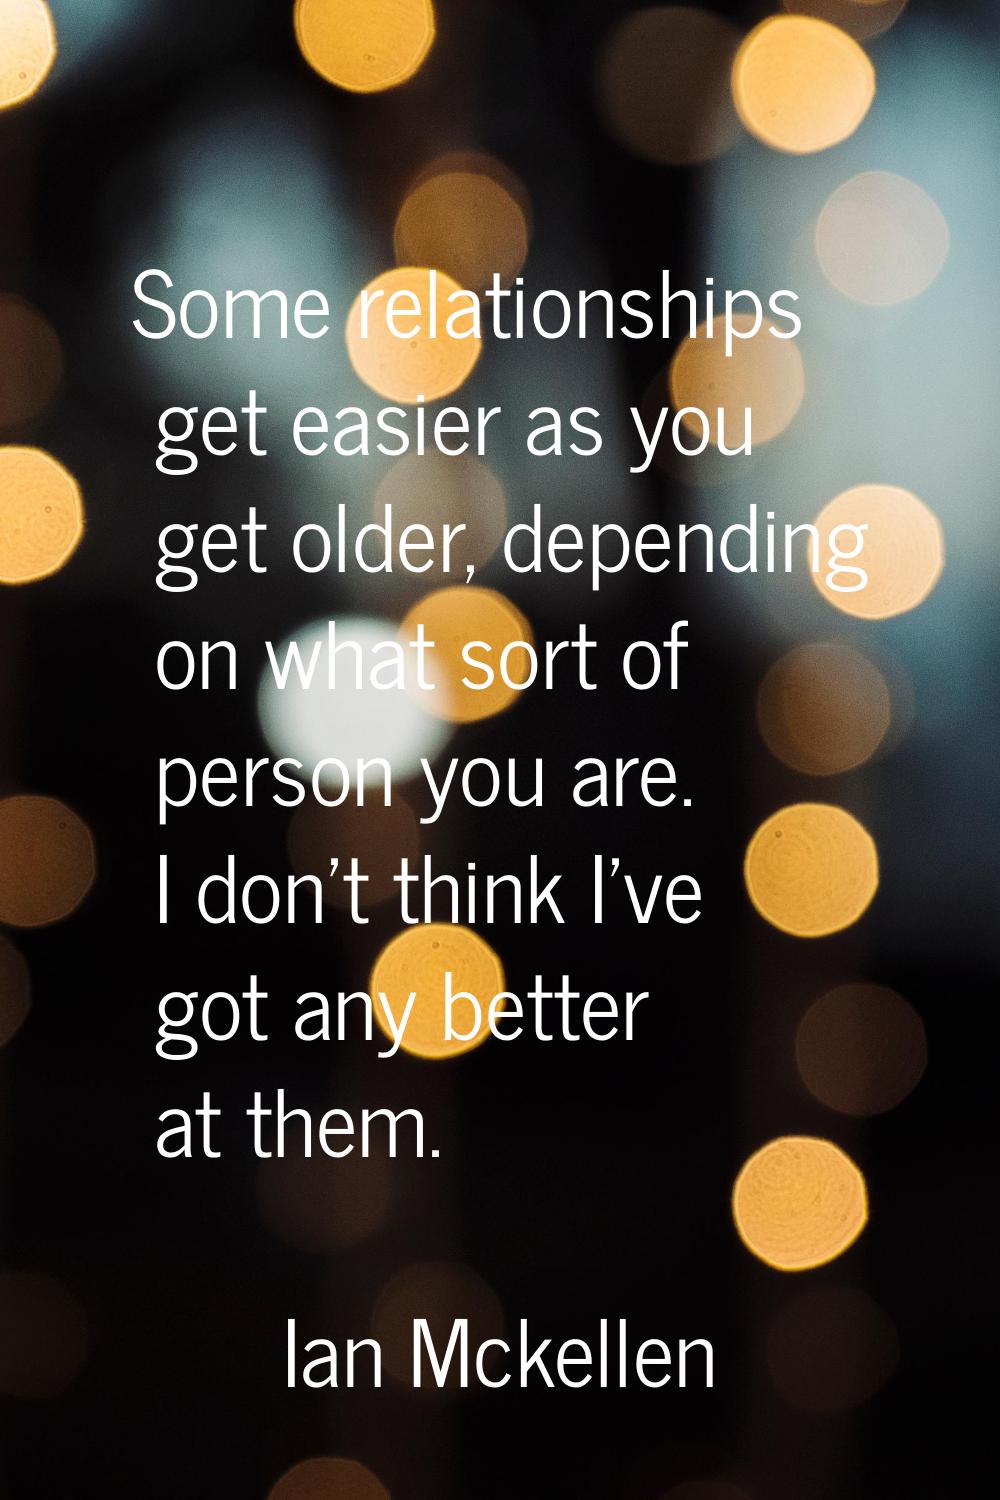 Some relationships get easier as you get older, depending on what sort of person you are. I don't t